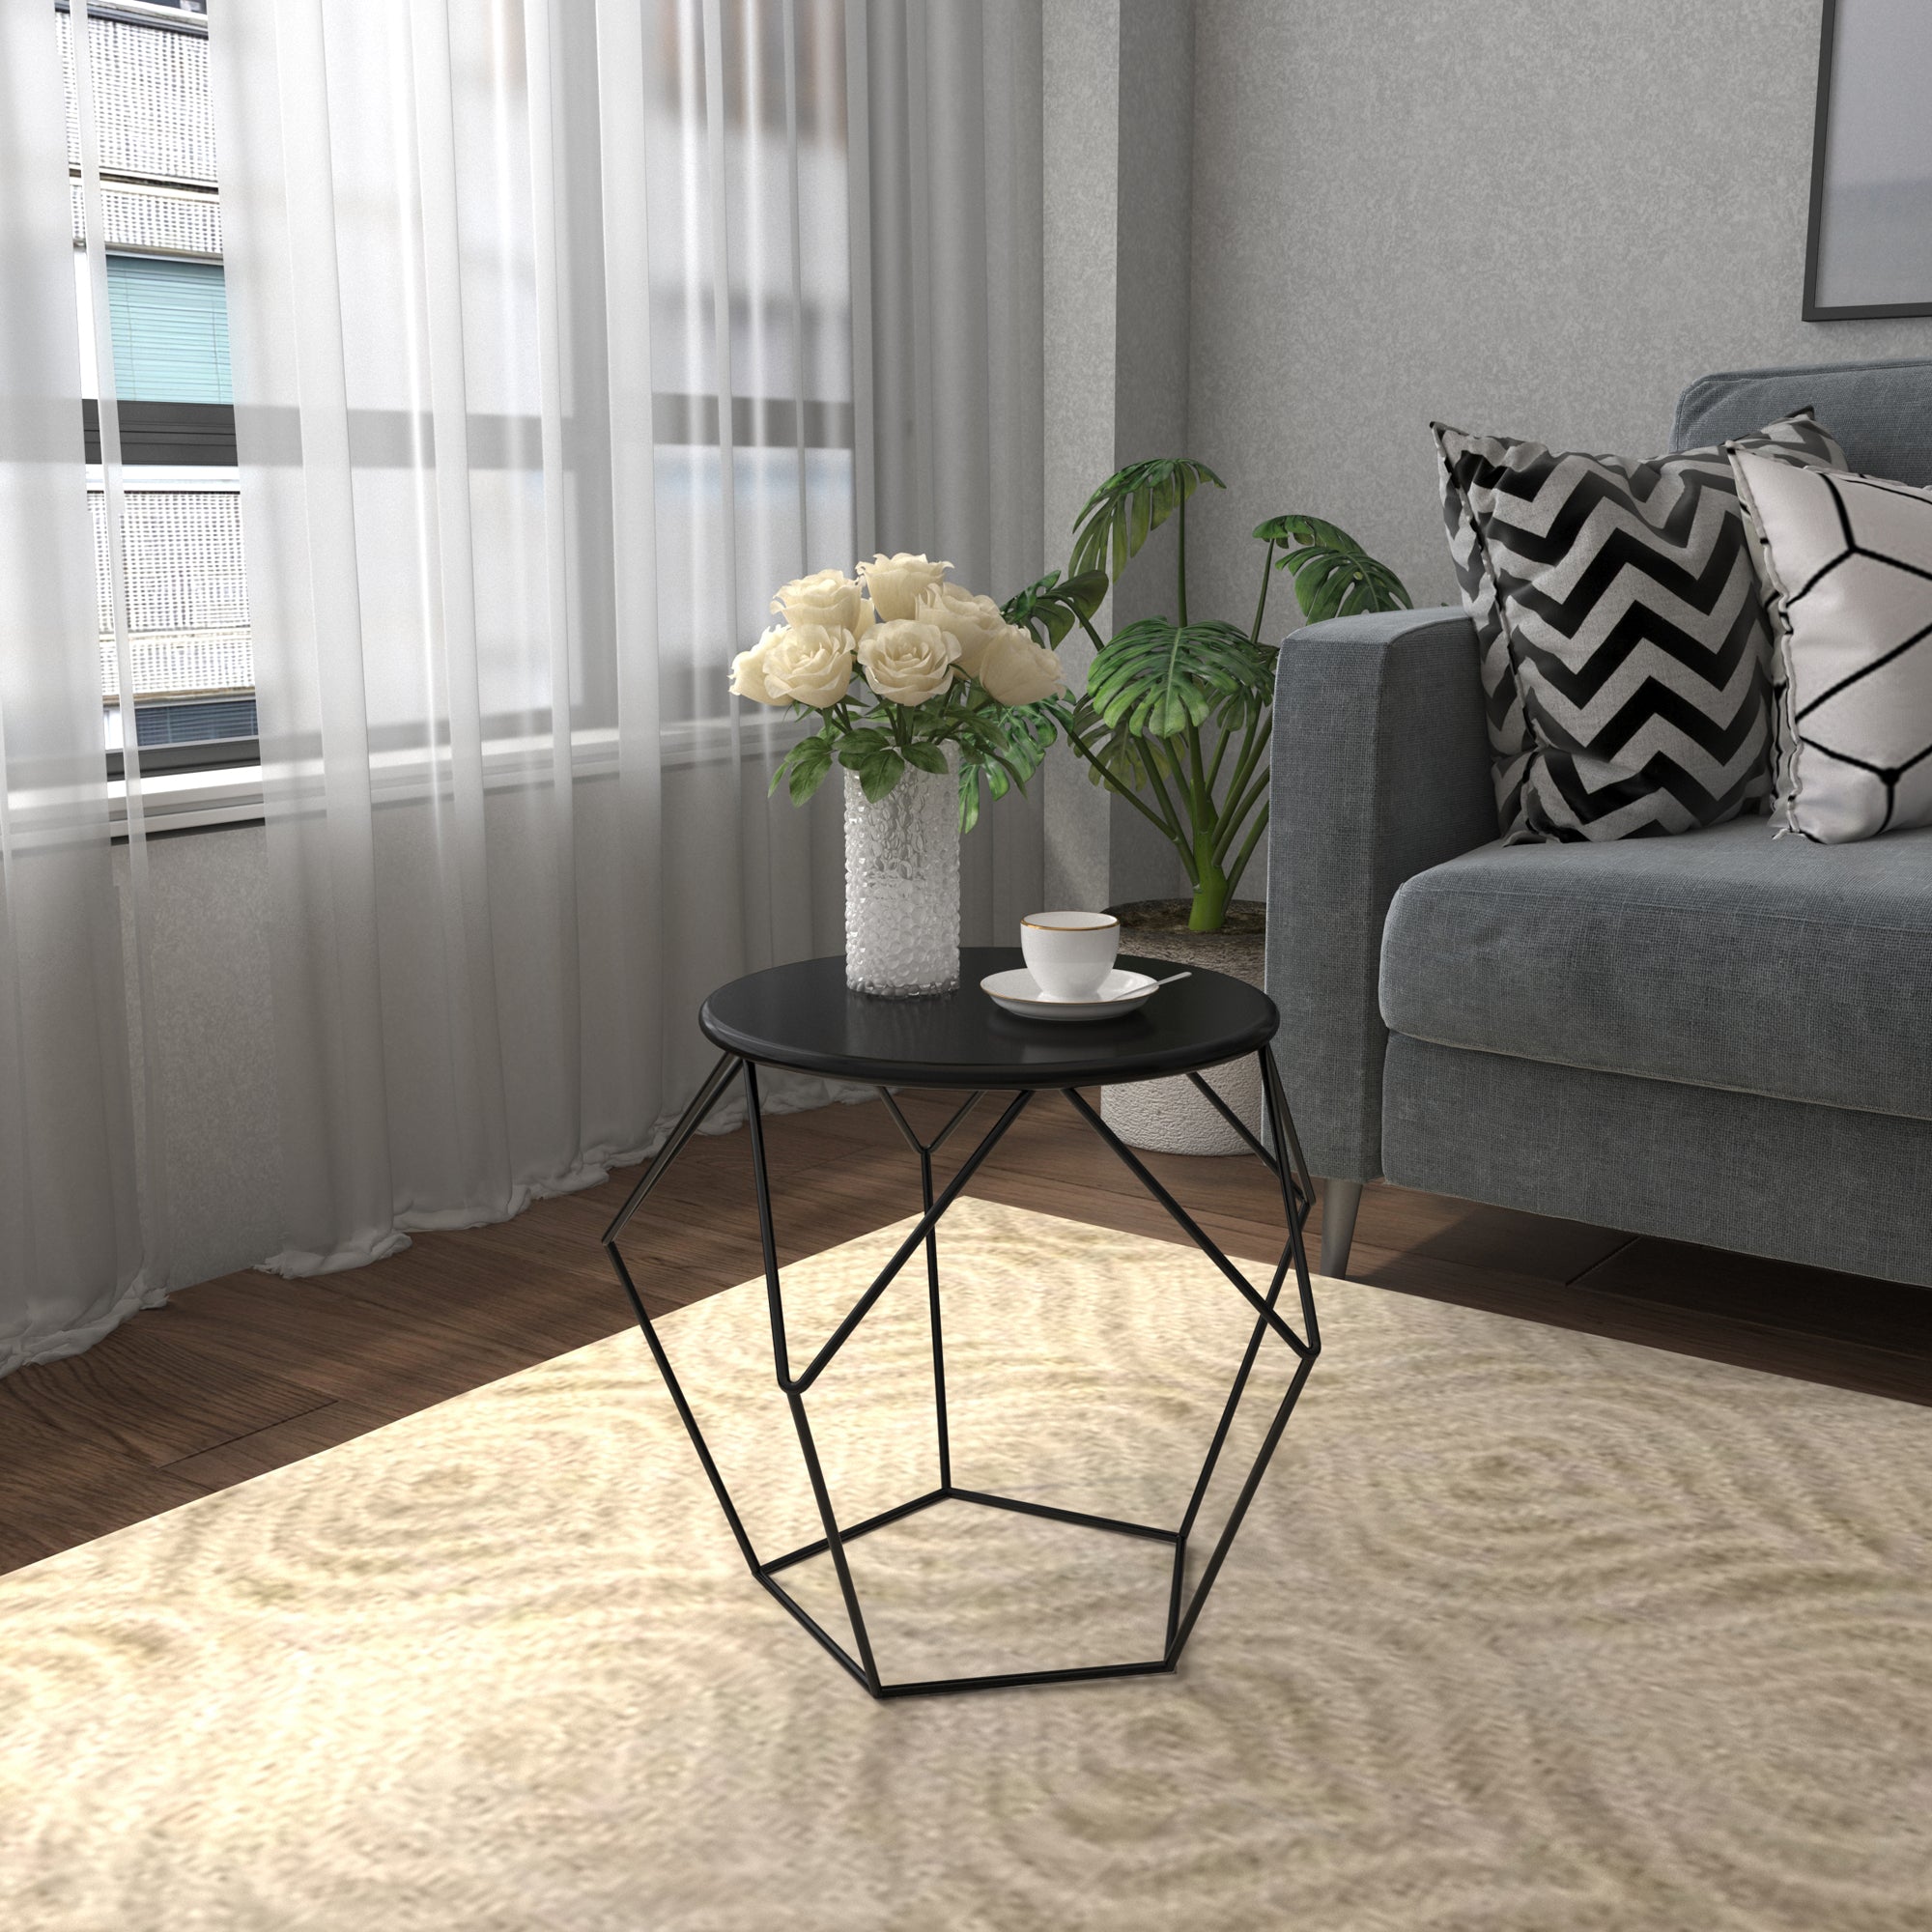 Coffee Table Side Table End Table Home Living Room Bed Room Furniture Modern Nordic Minimalist Style-1